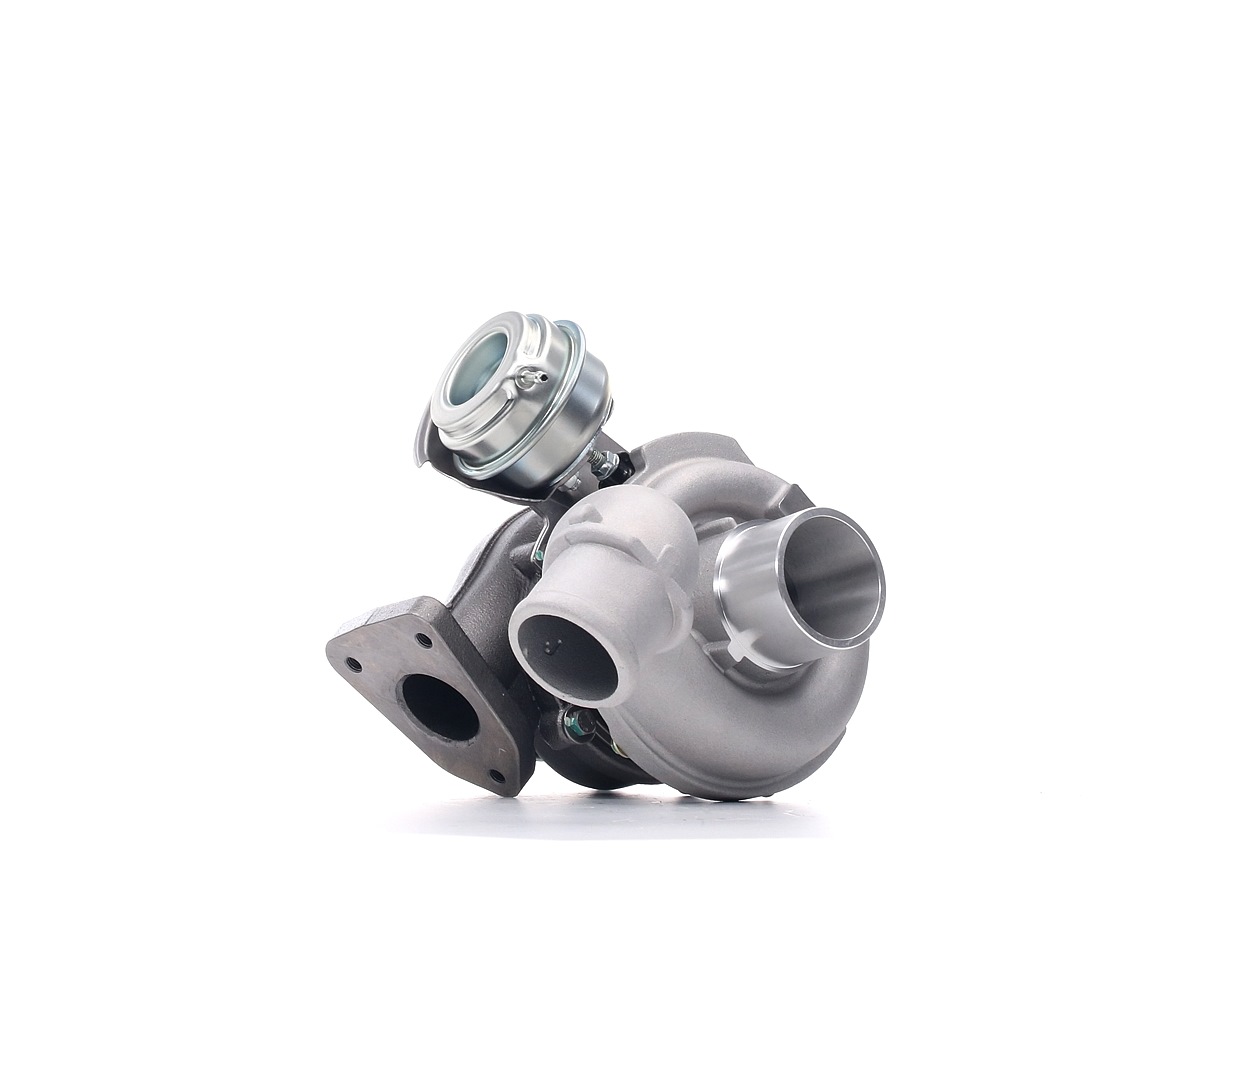 RIDEX 2234C0111 Turbocharger Exhaust Turbocharger, VTG turbocharger, Euro 3, Pneumatic, without attachment material